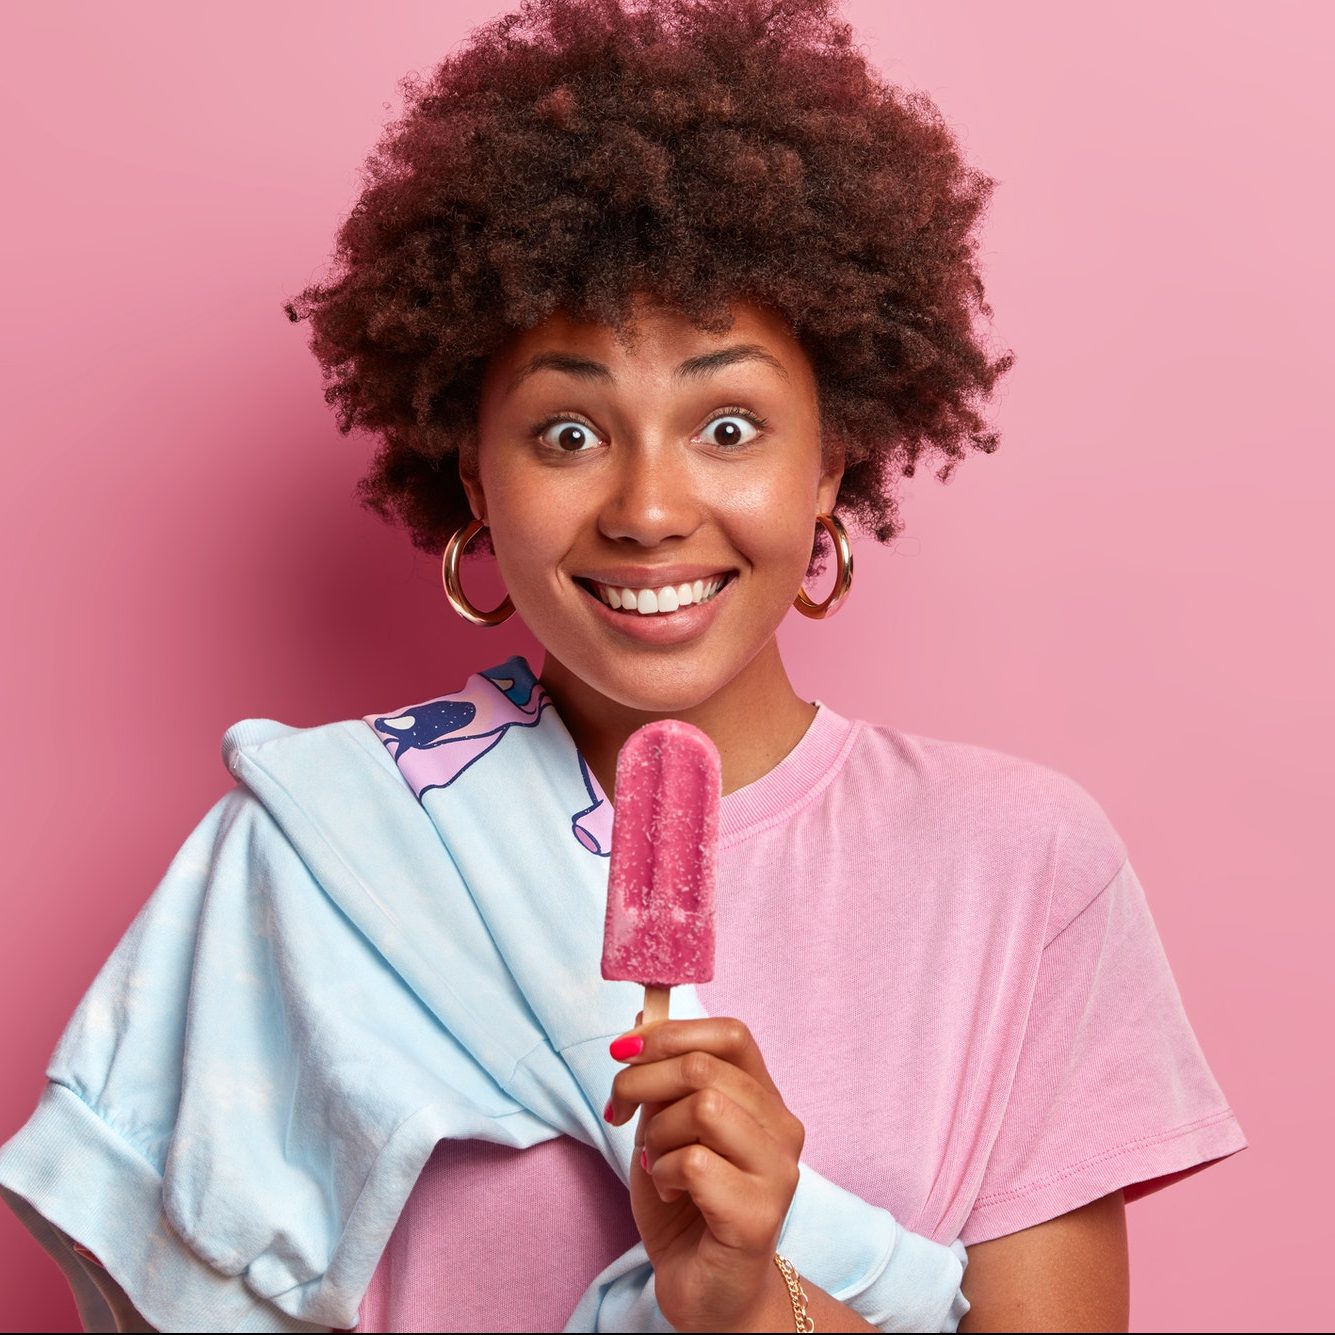 photo-of-happy-surprised-dark-skinned-woman-with-afro-hair-holds-delicious-popsicle-and-dressed-casu-e1622718569709.jpg